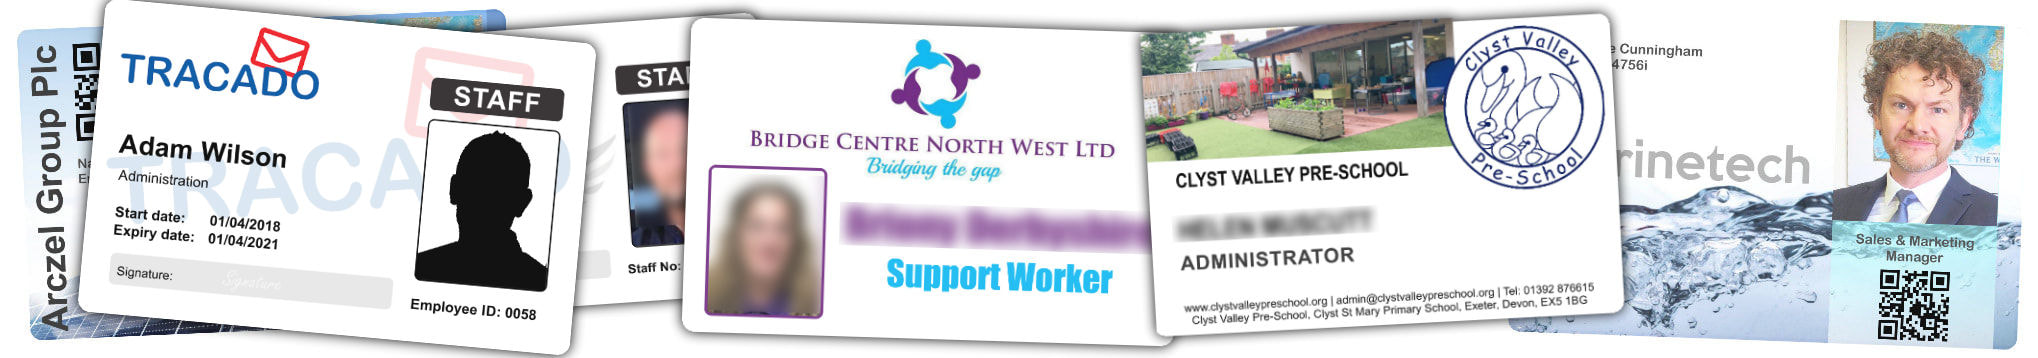 West Bromwich examples of staff photo ID cards | samples of employee Identity card printing | Workers ID cards printed in 